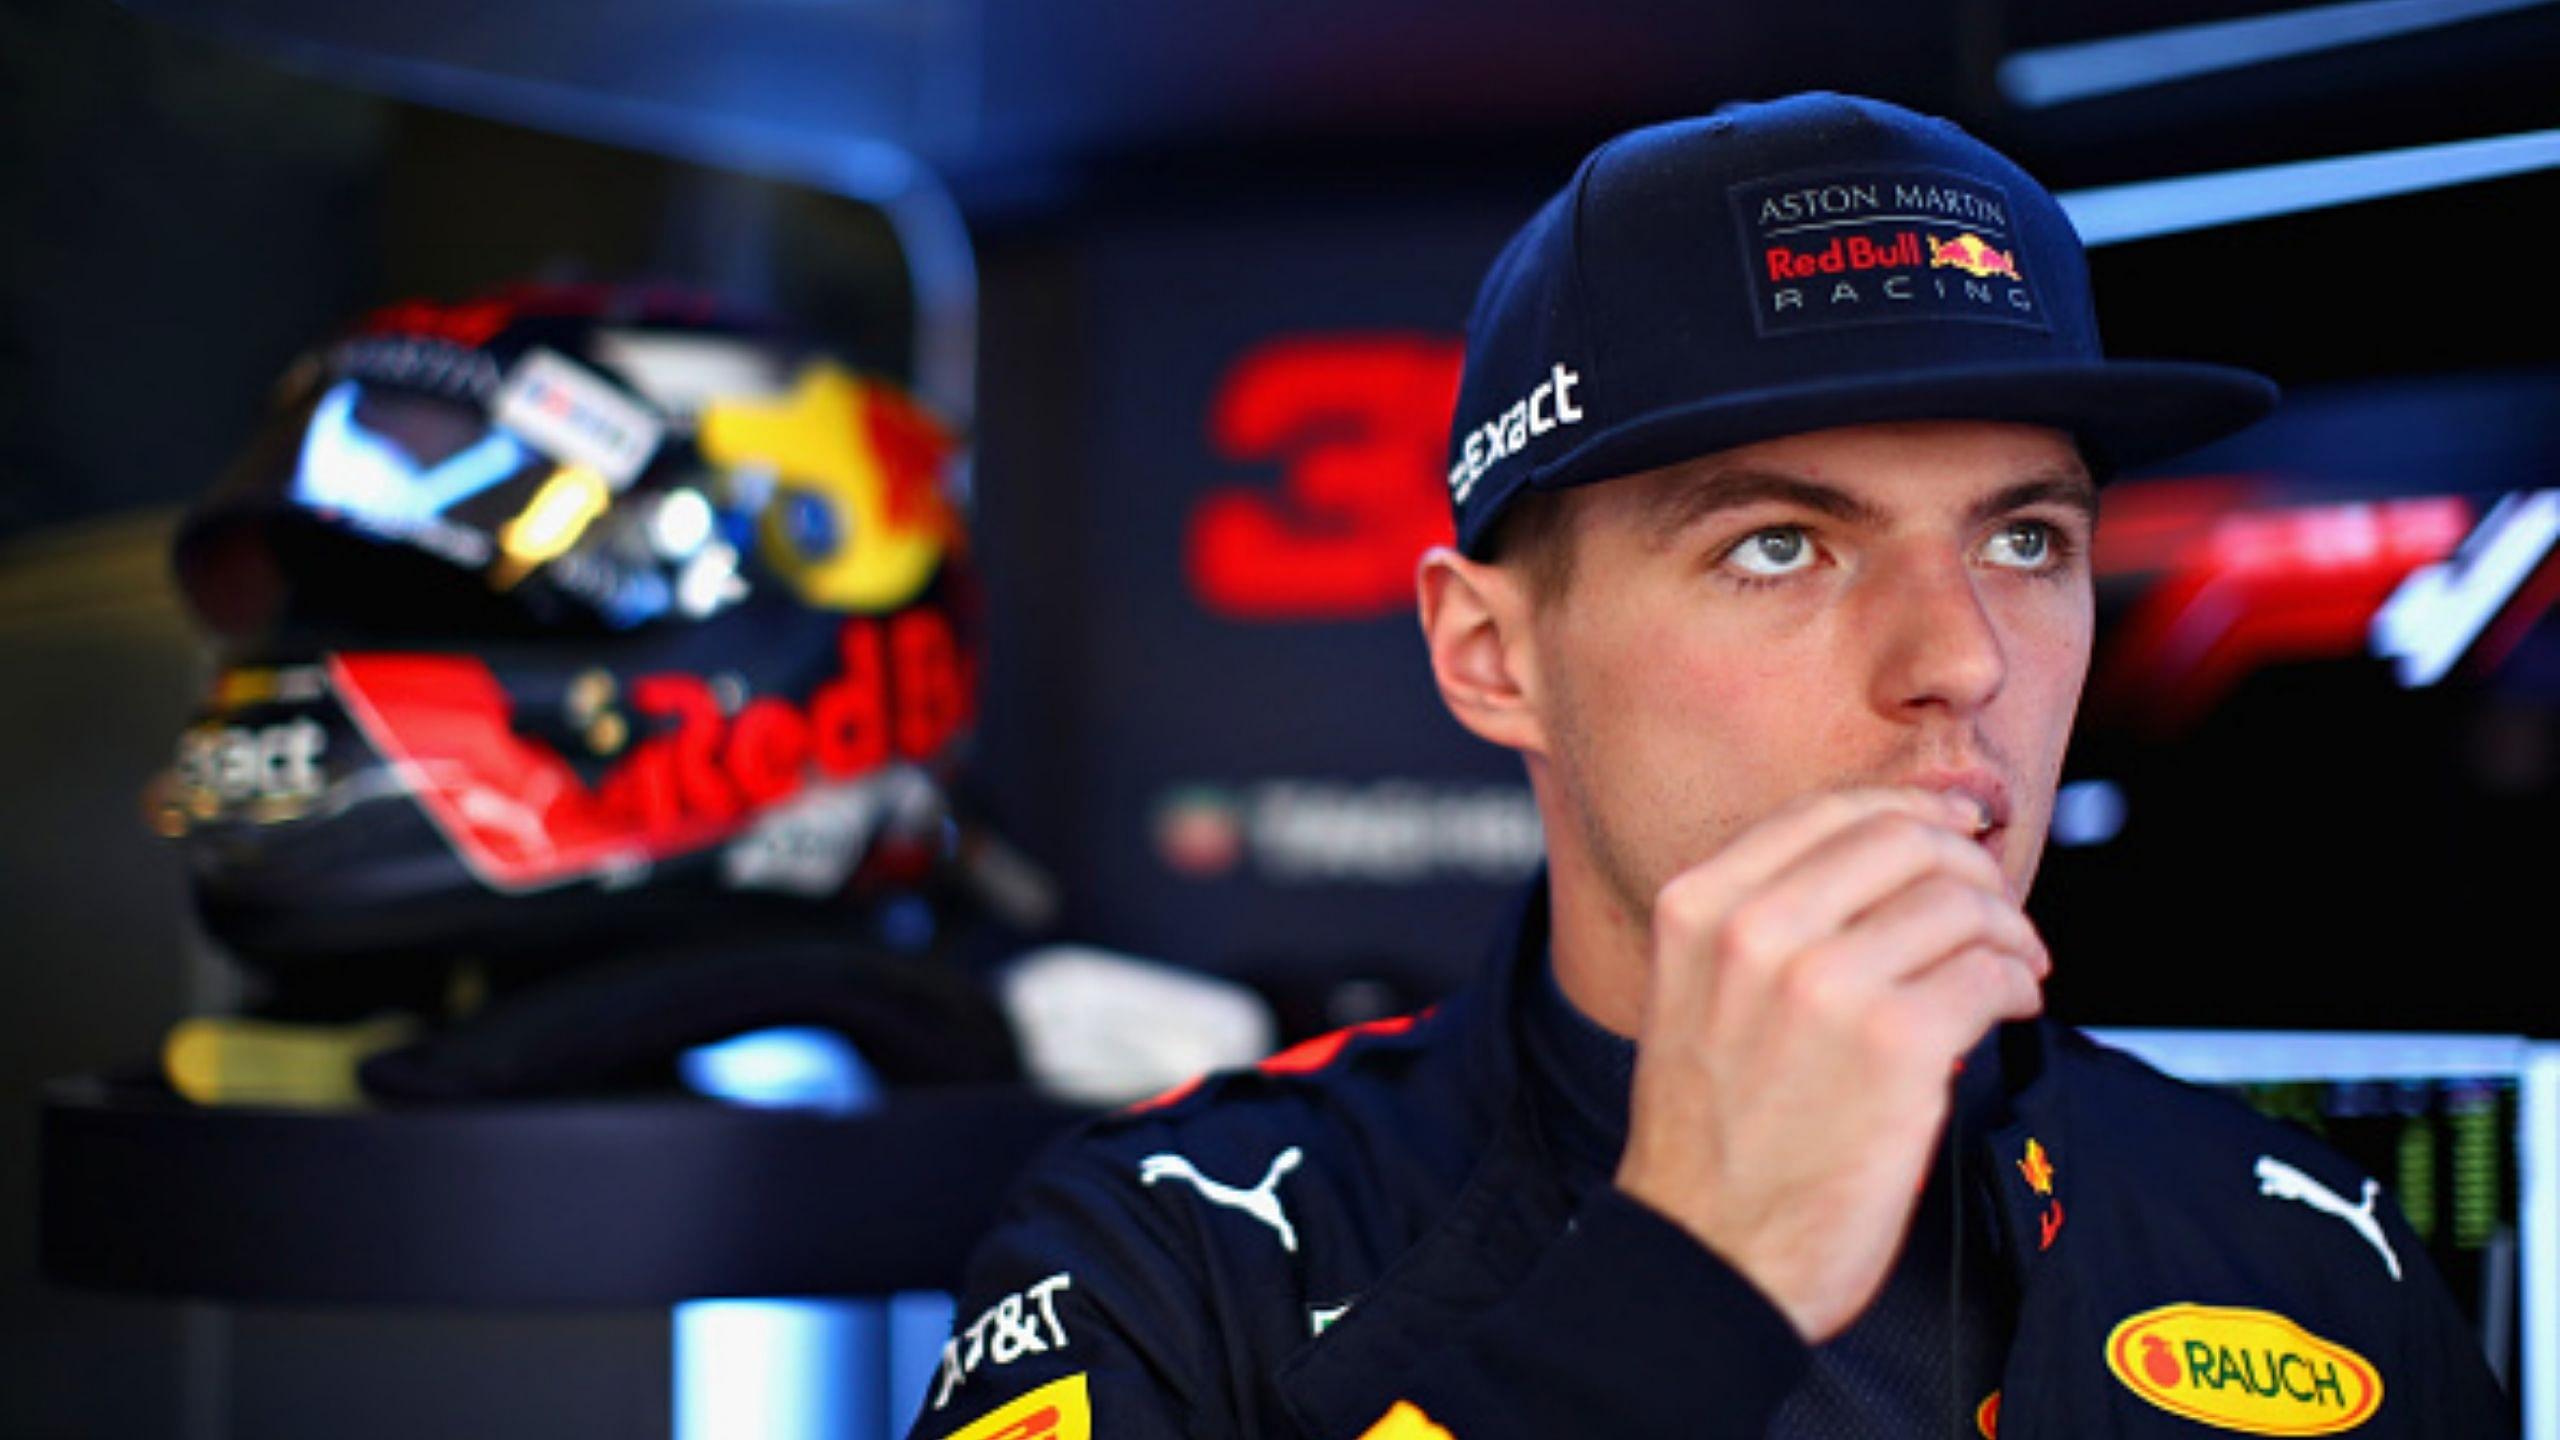 “It would be better if the cars were a lot lighter” - Max Verstappen unimpressed with the modern era of Formula 1